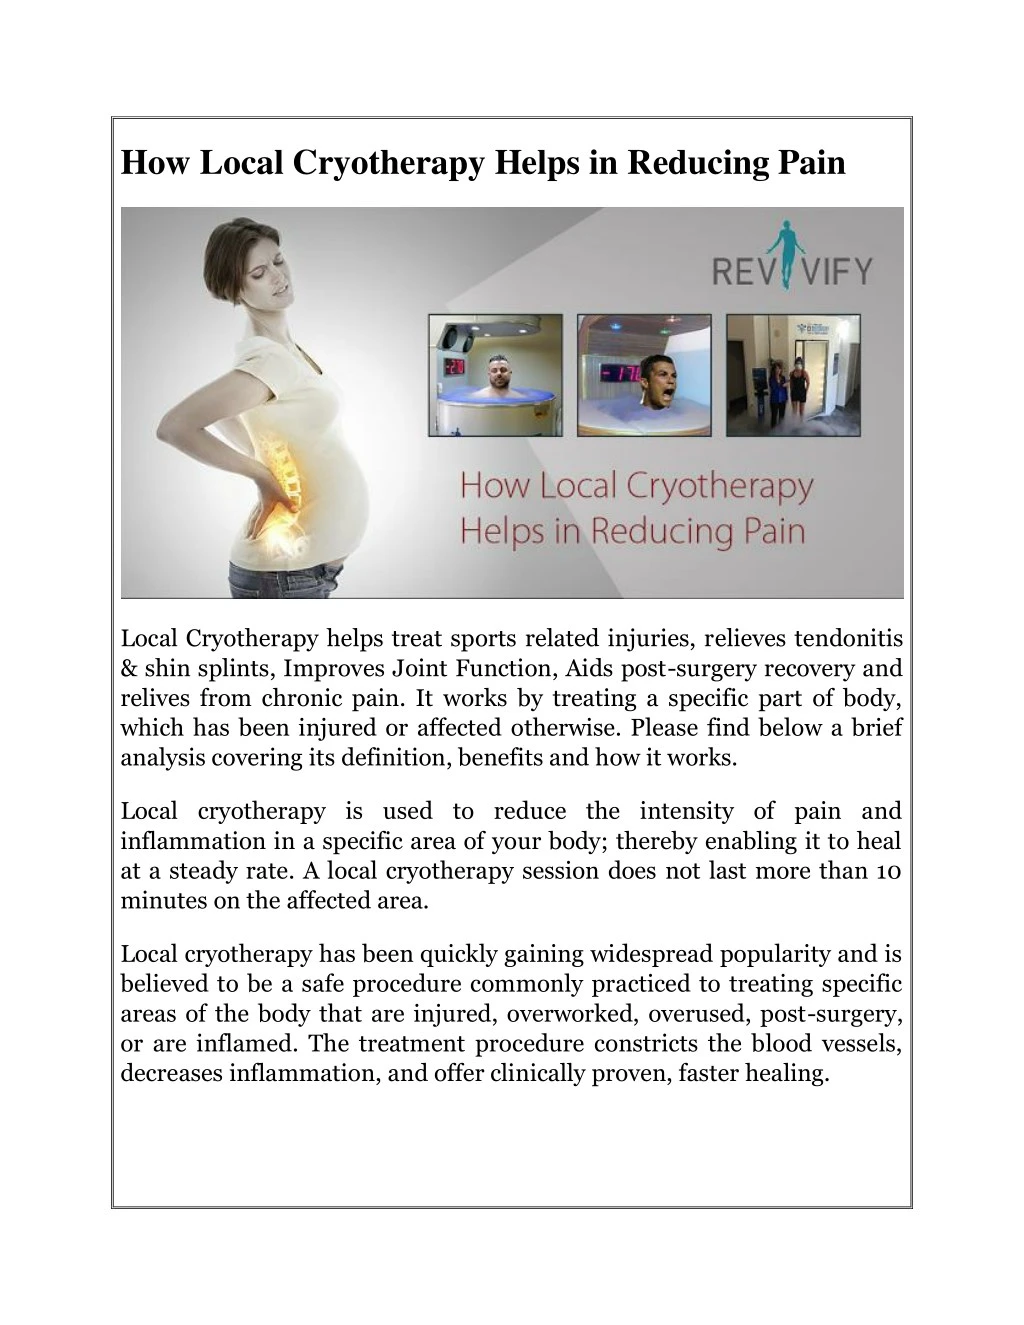 how local cryotherapy helps in reducing pain